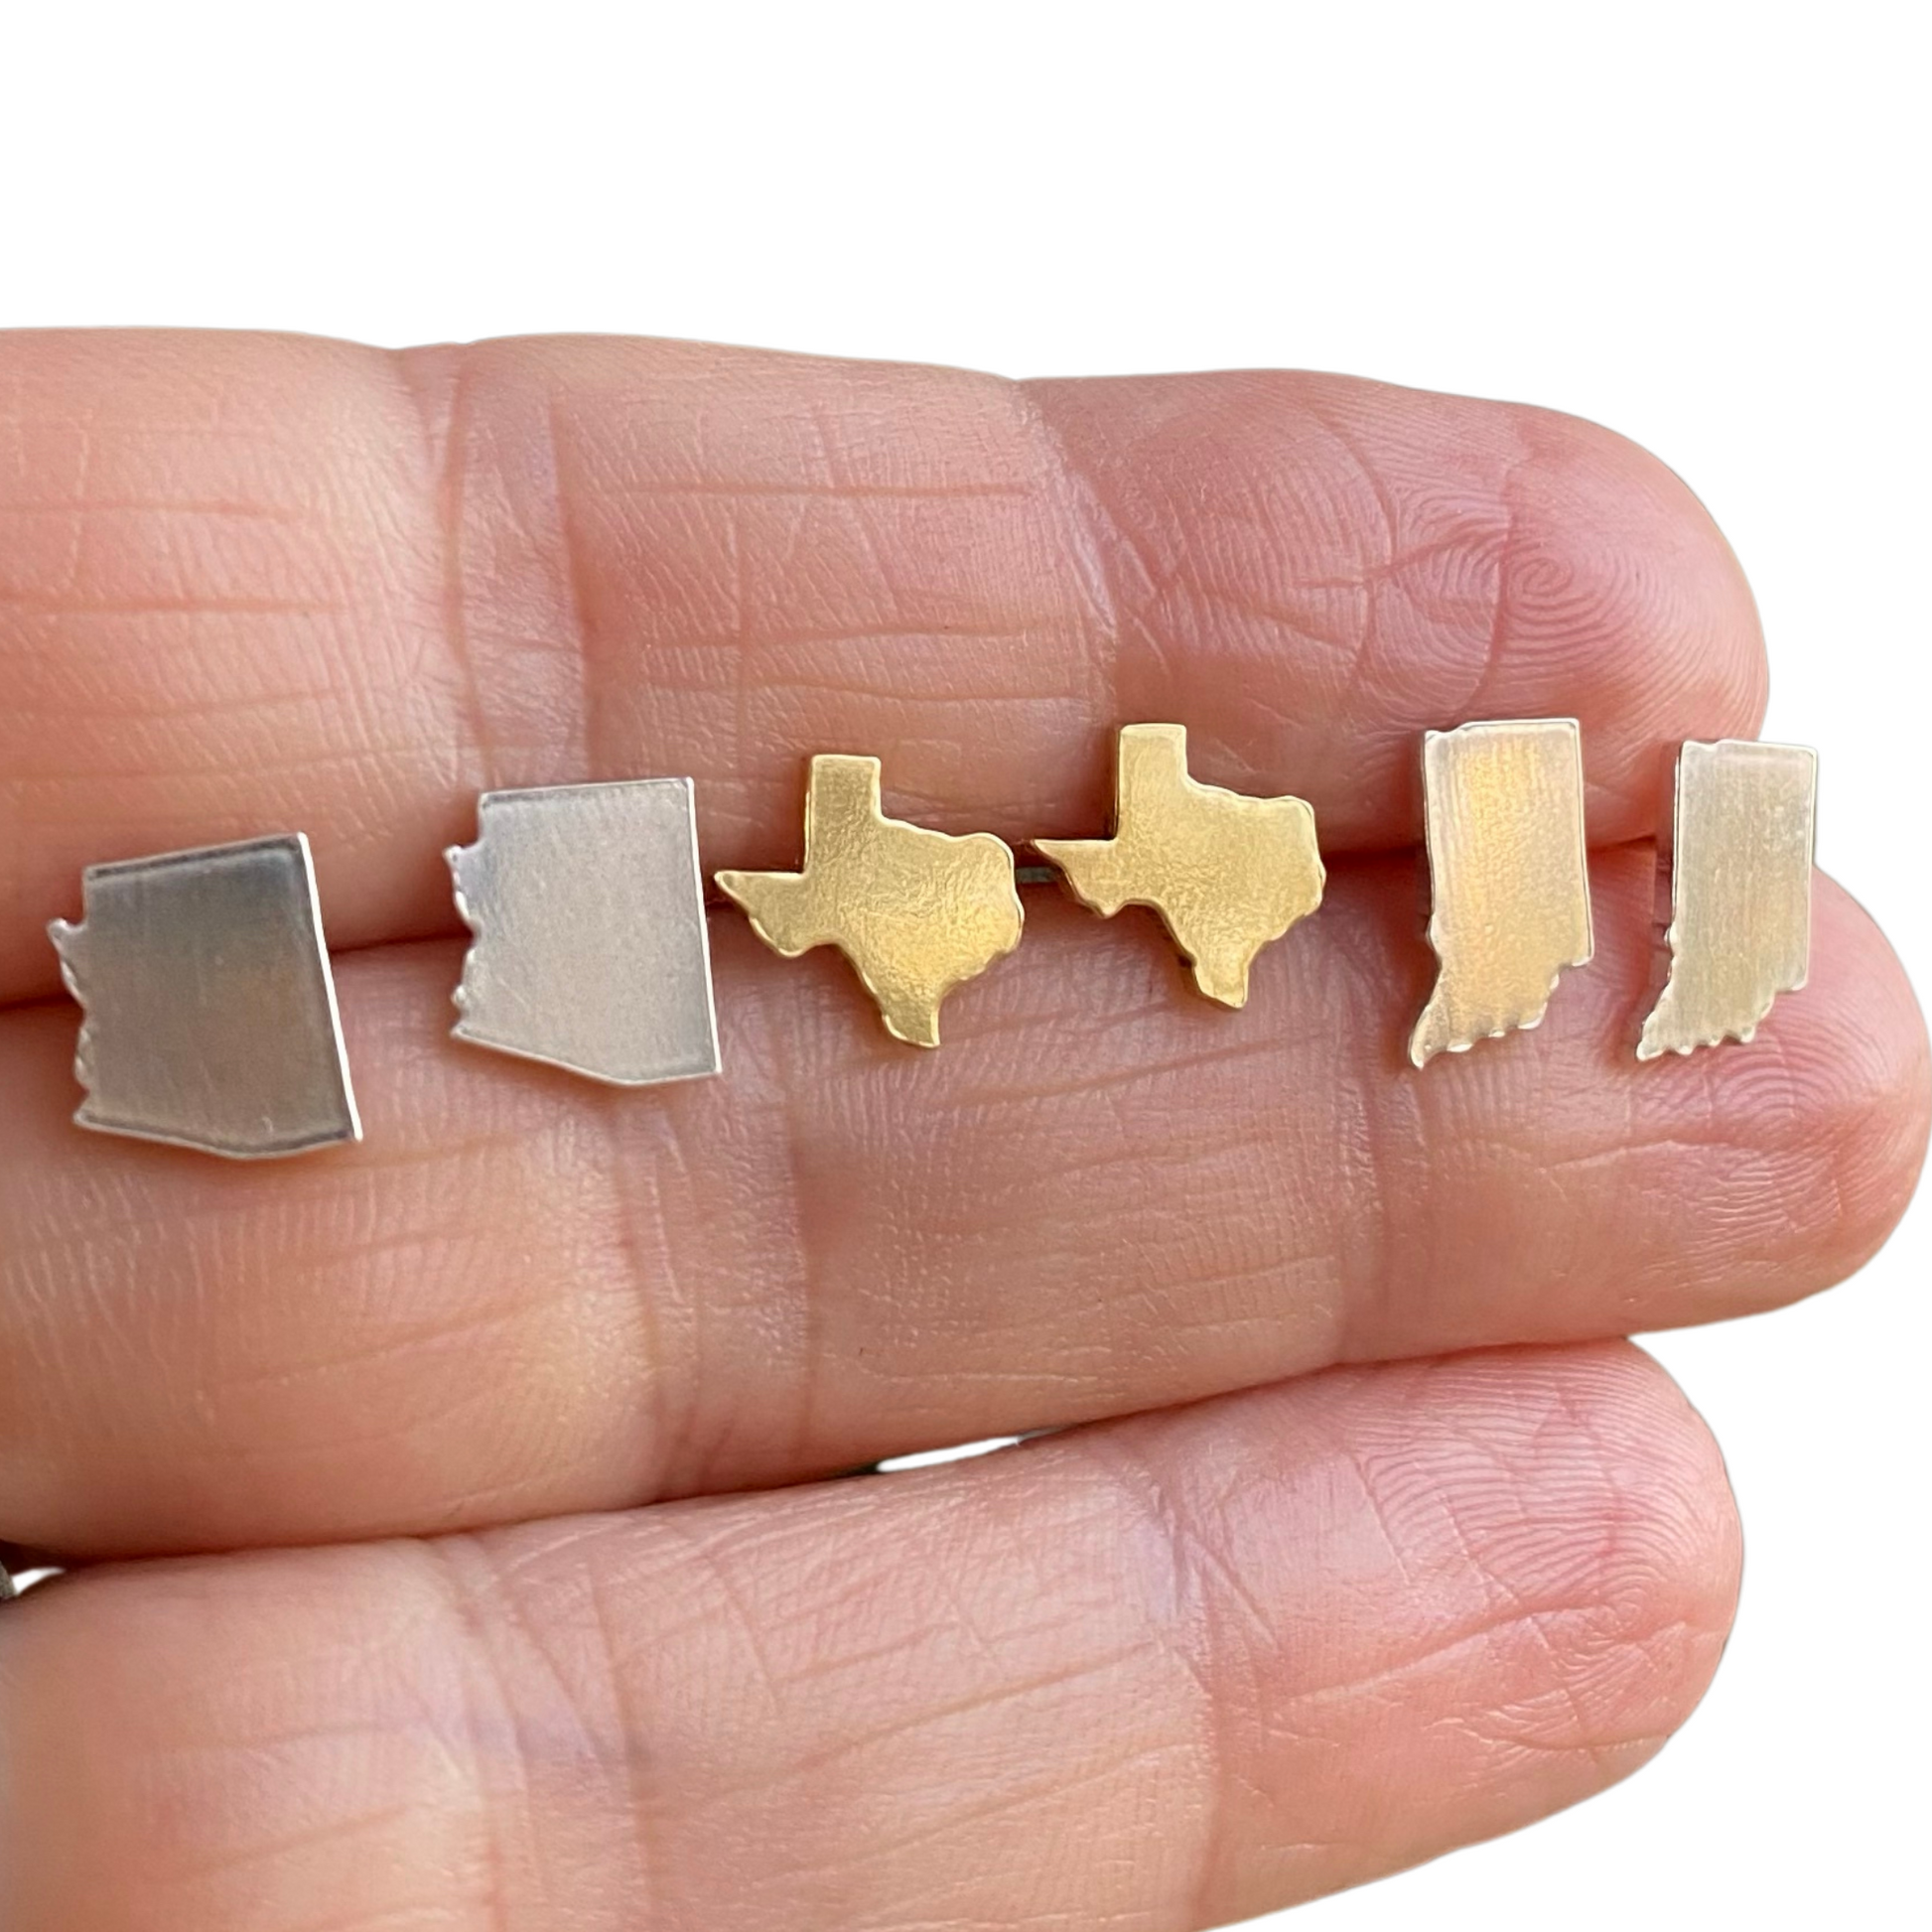 state outline earrings featuring Arizona earrings, Texas earrings and Indiana earrings in gold and sterling silver displayed across a hand